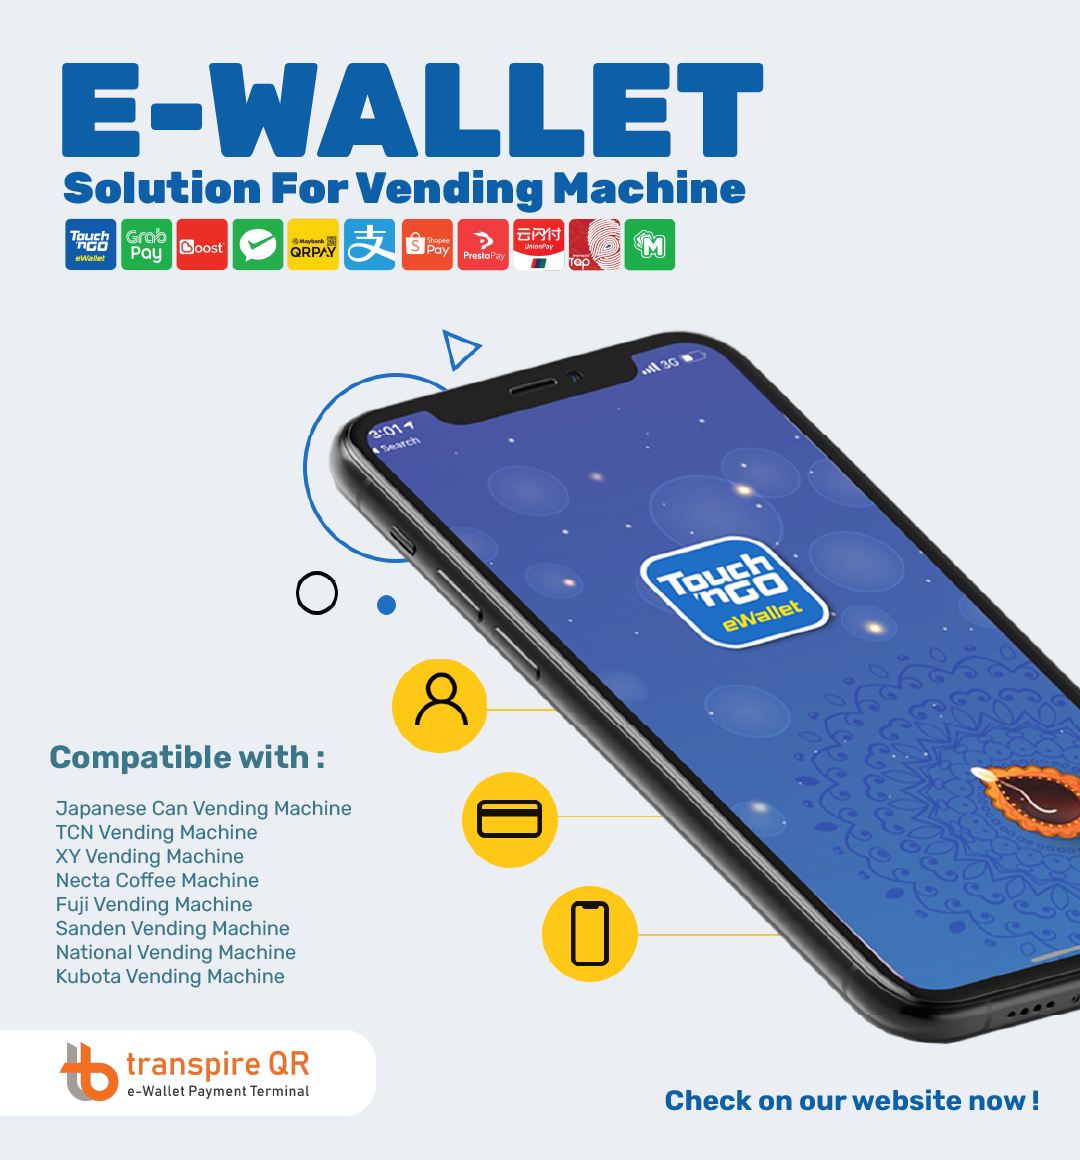 E-Wallet Payment Solution For Vending Machine in Malaysia